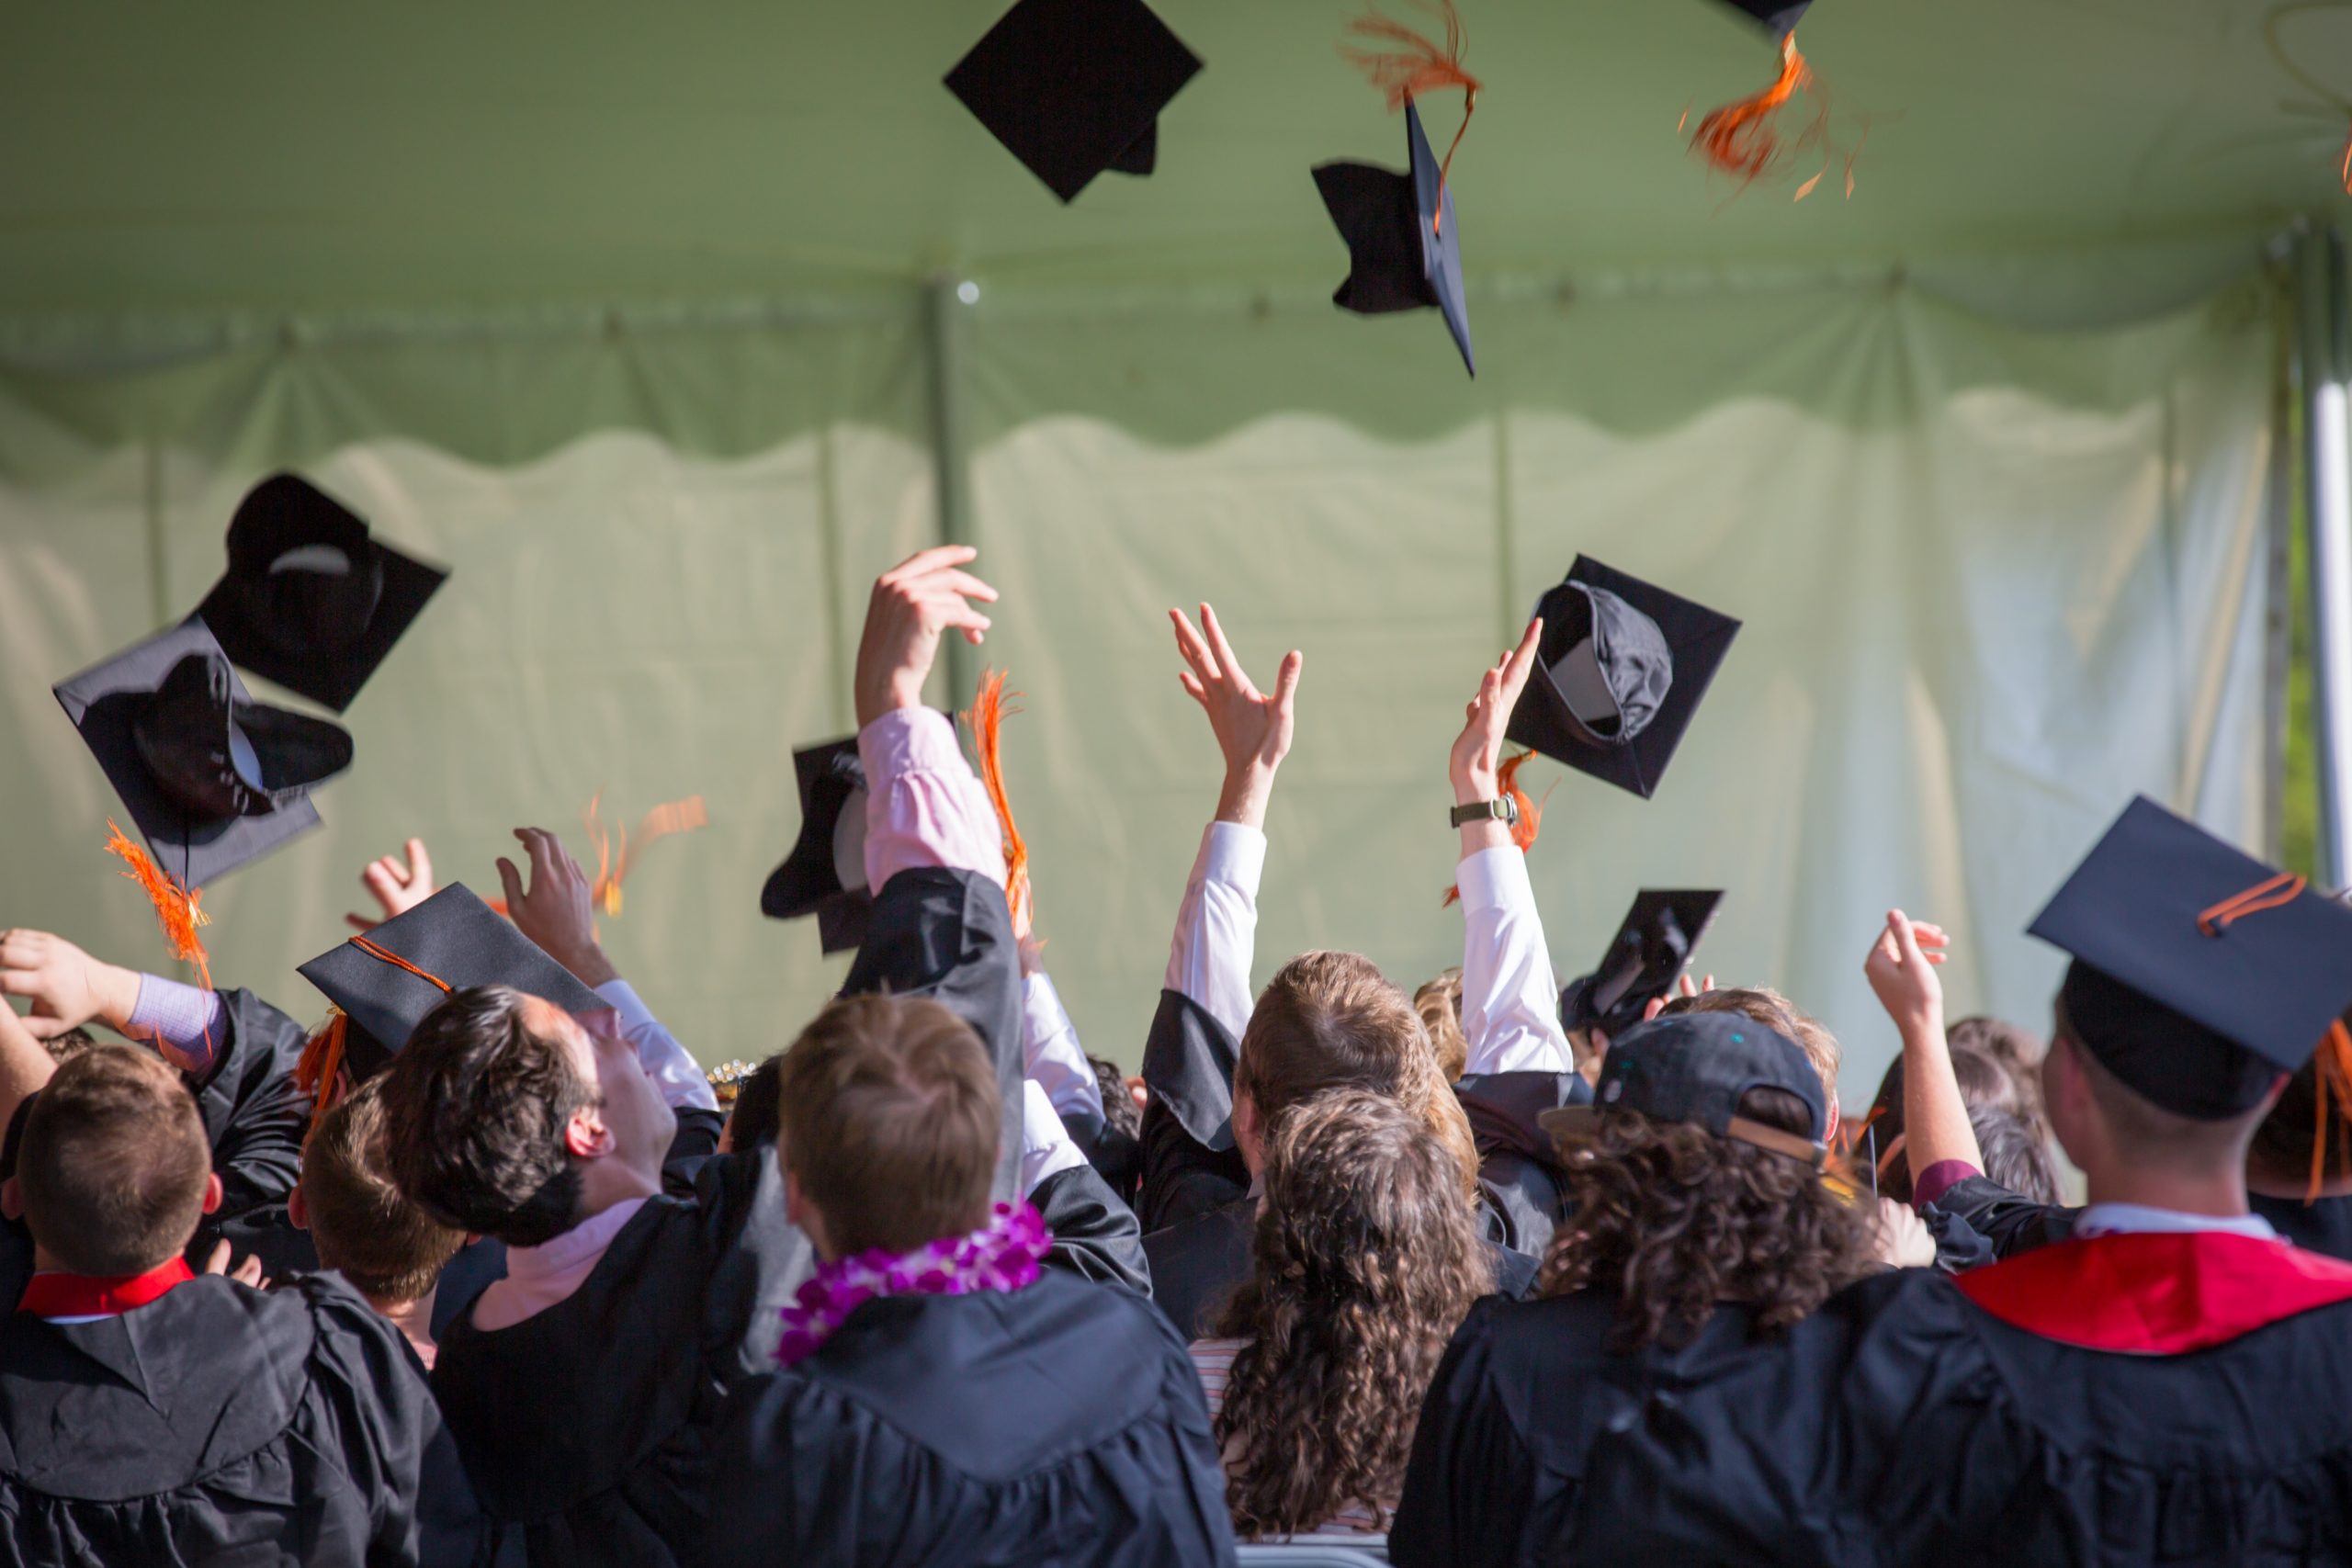 How to Plan a Memorable Graduation Party?